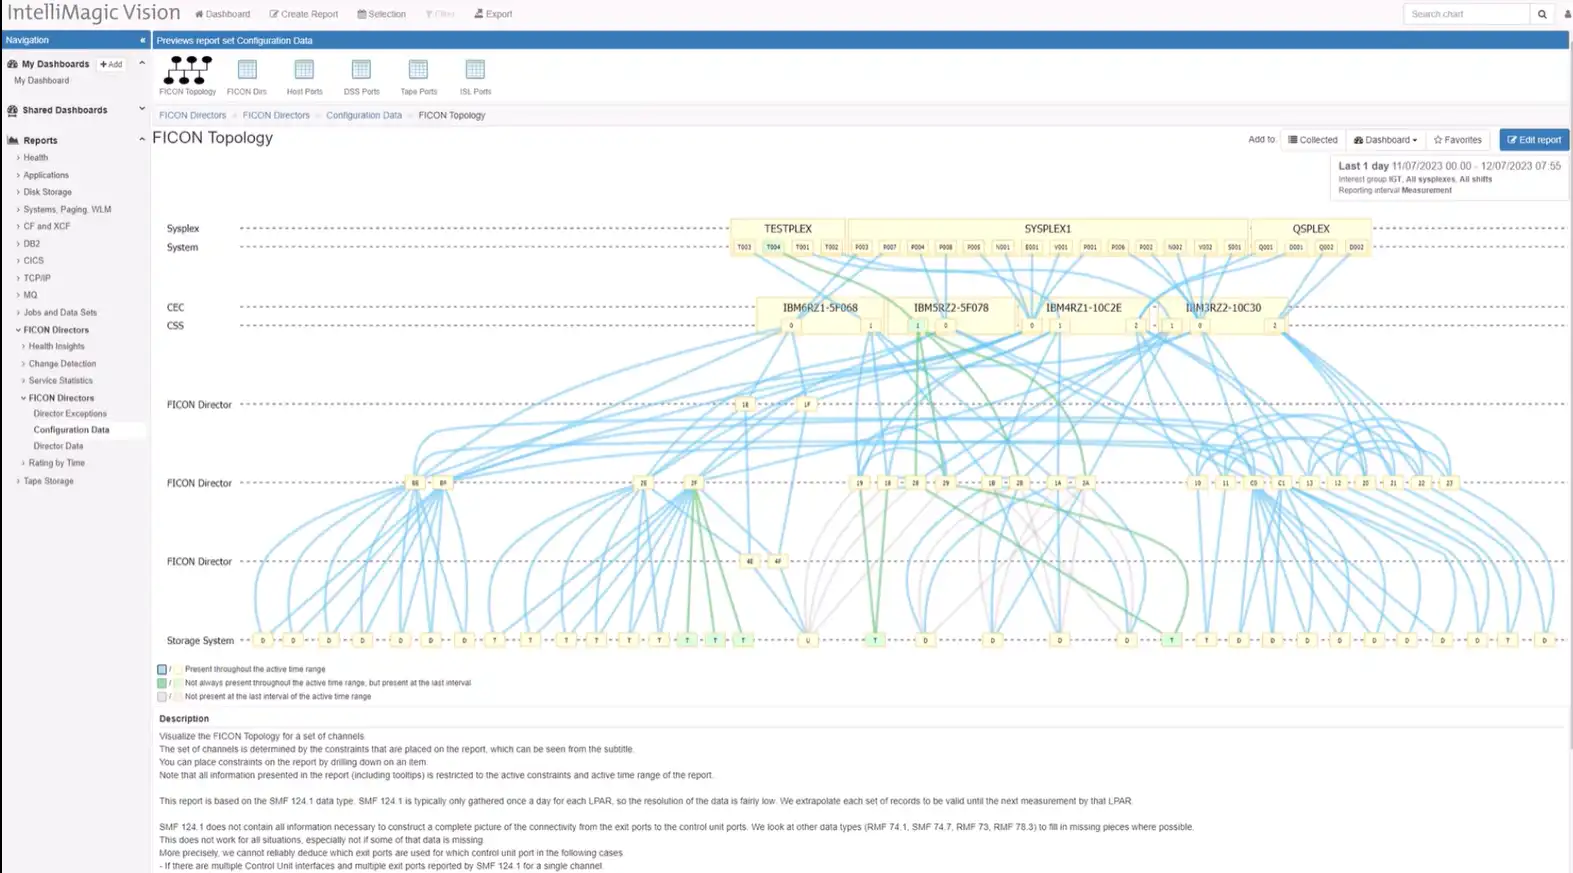 Interactive FICON Topology report in IntelliMagic Vision 